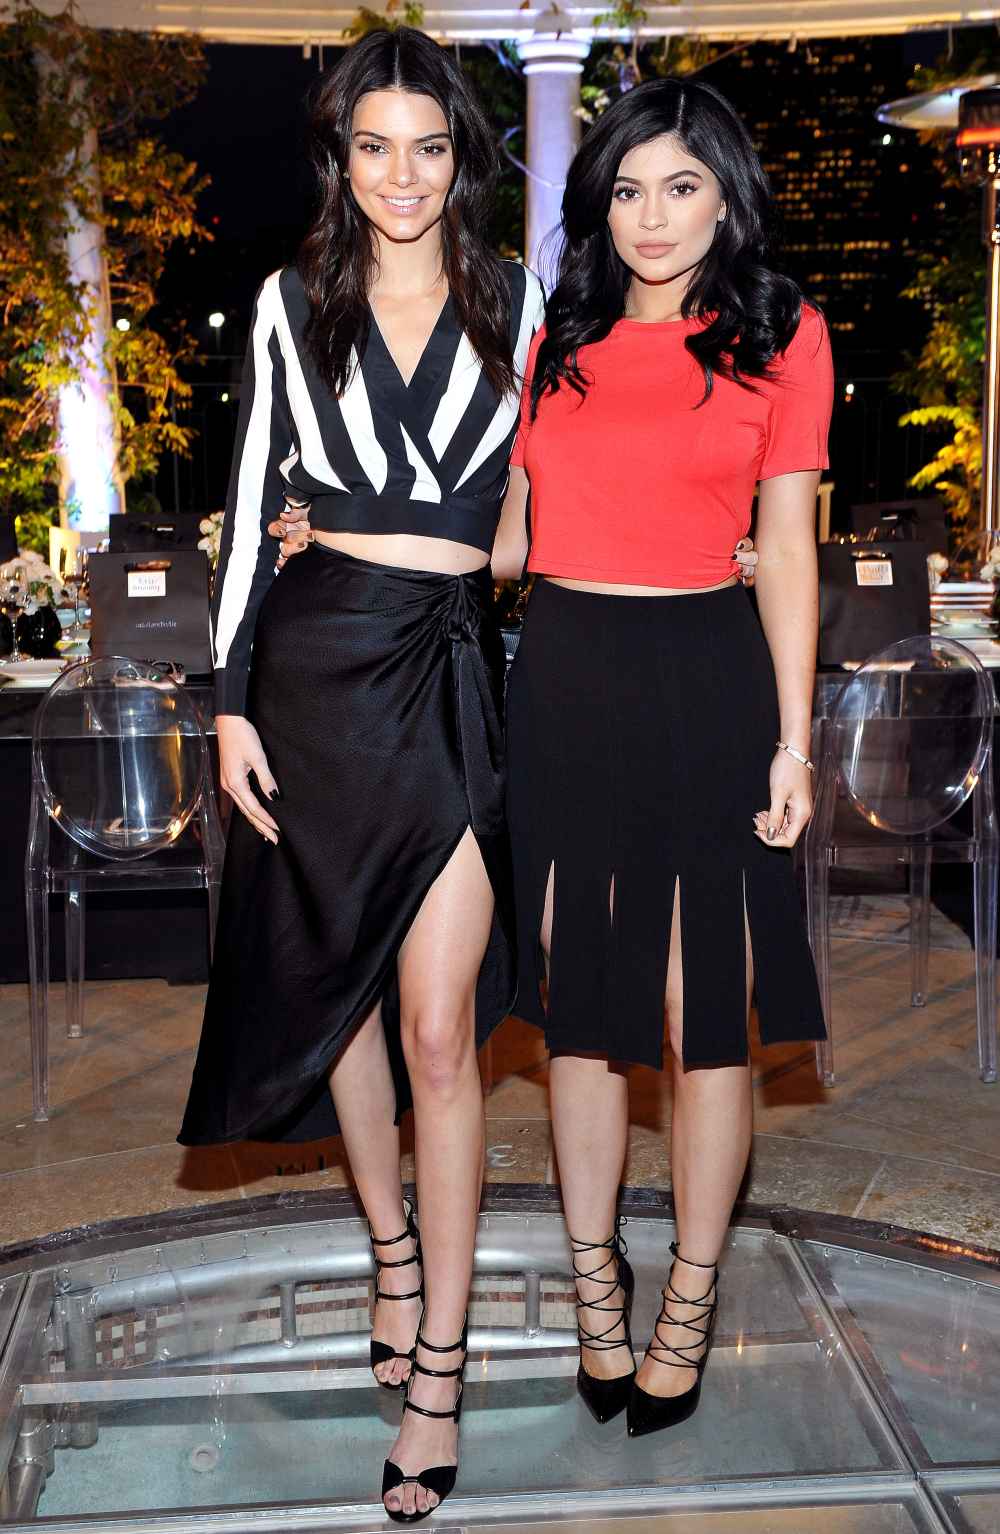 Leggy Kendall and Kylie Jenner celebrate the holidays with ANOTHER